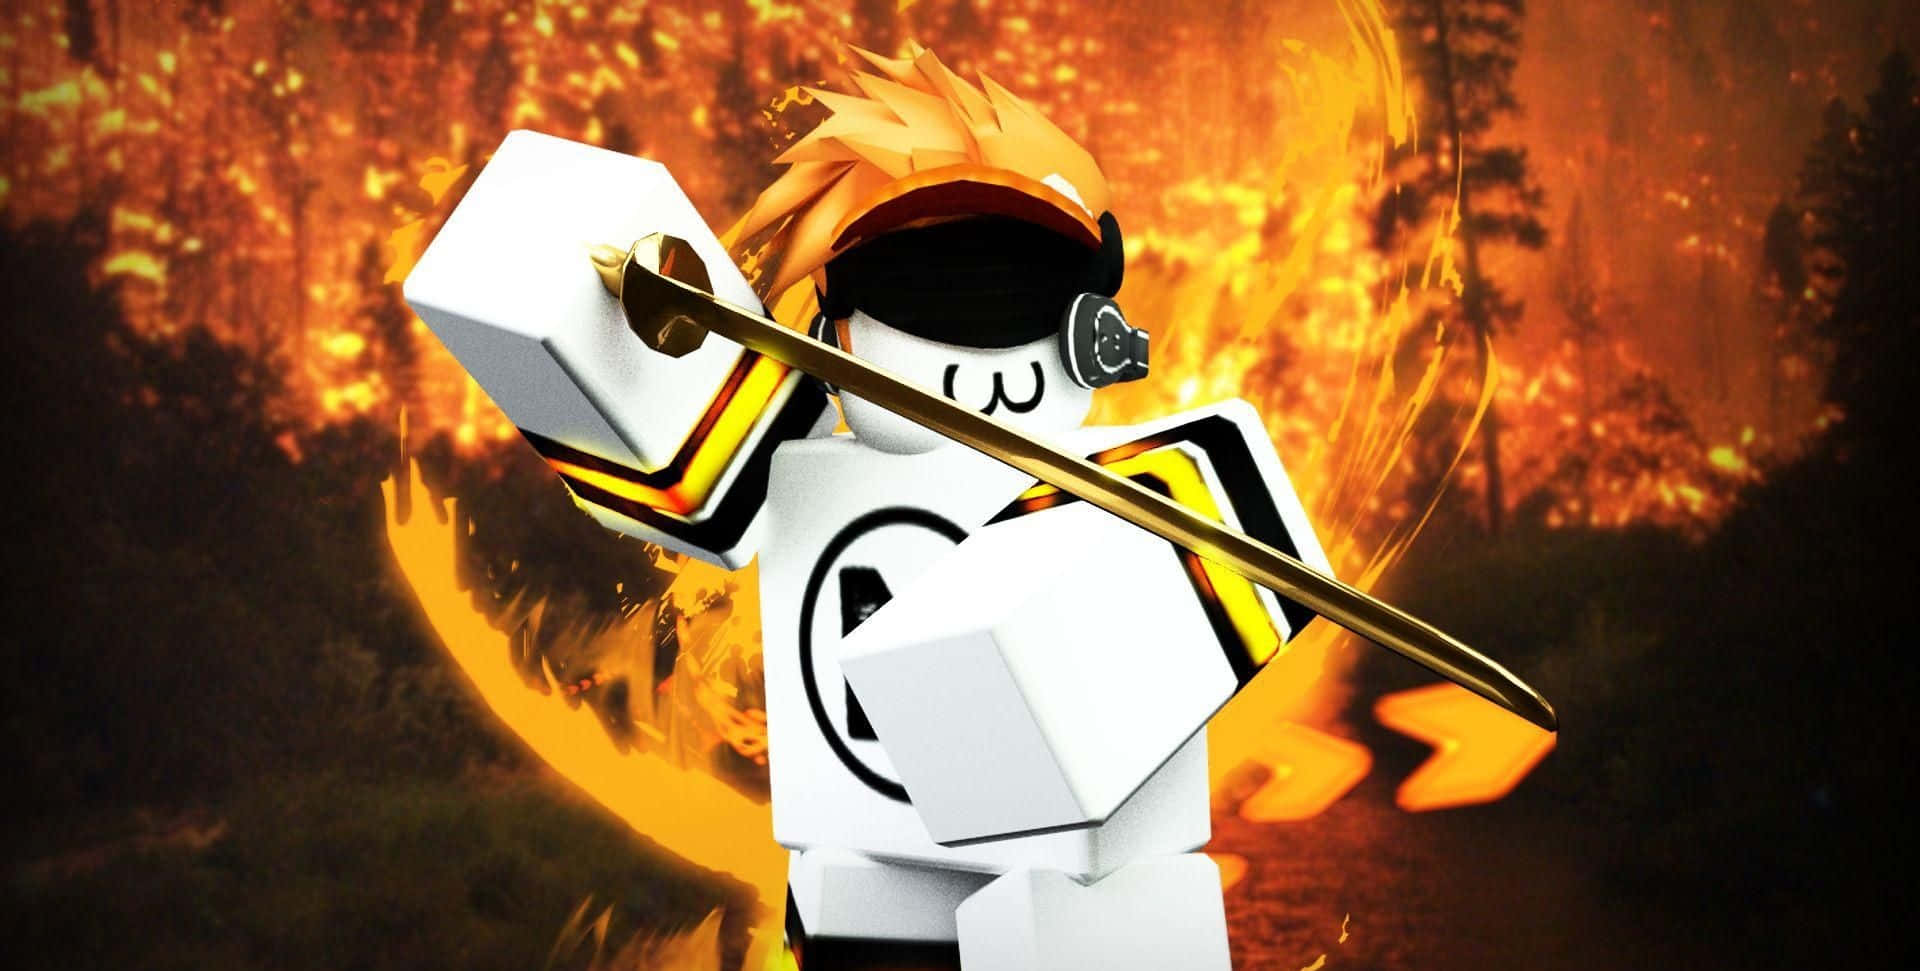 Roblox Wallpapers